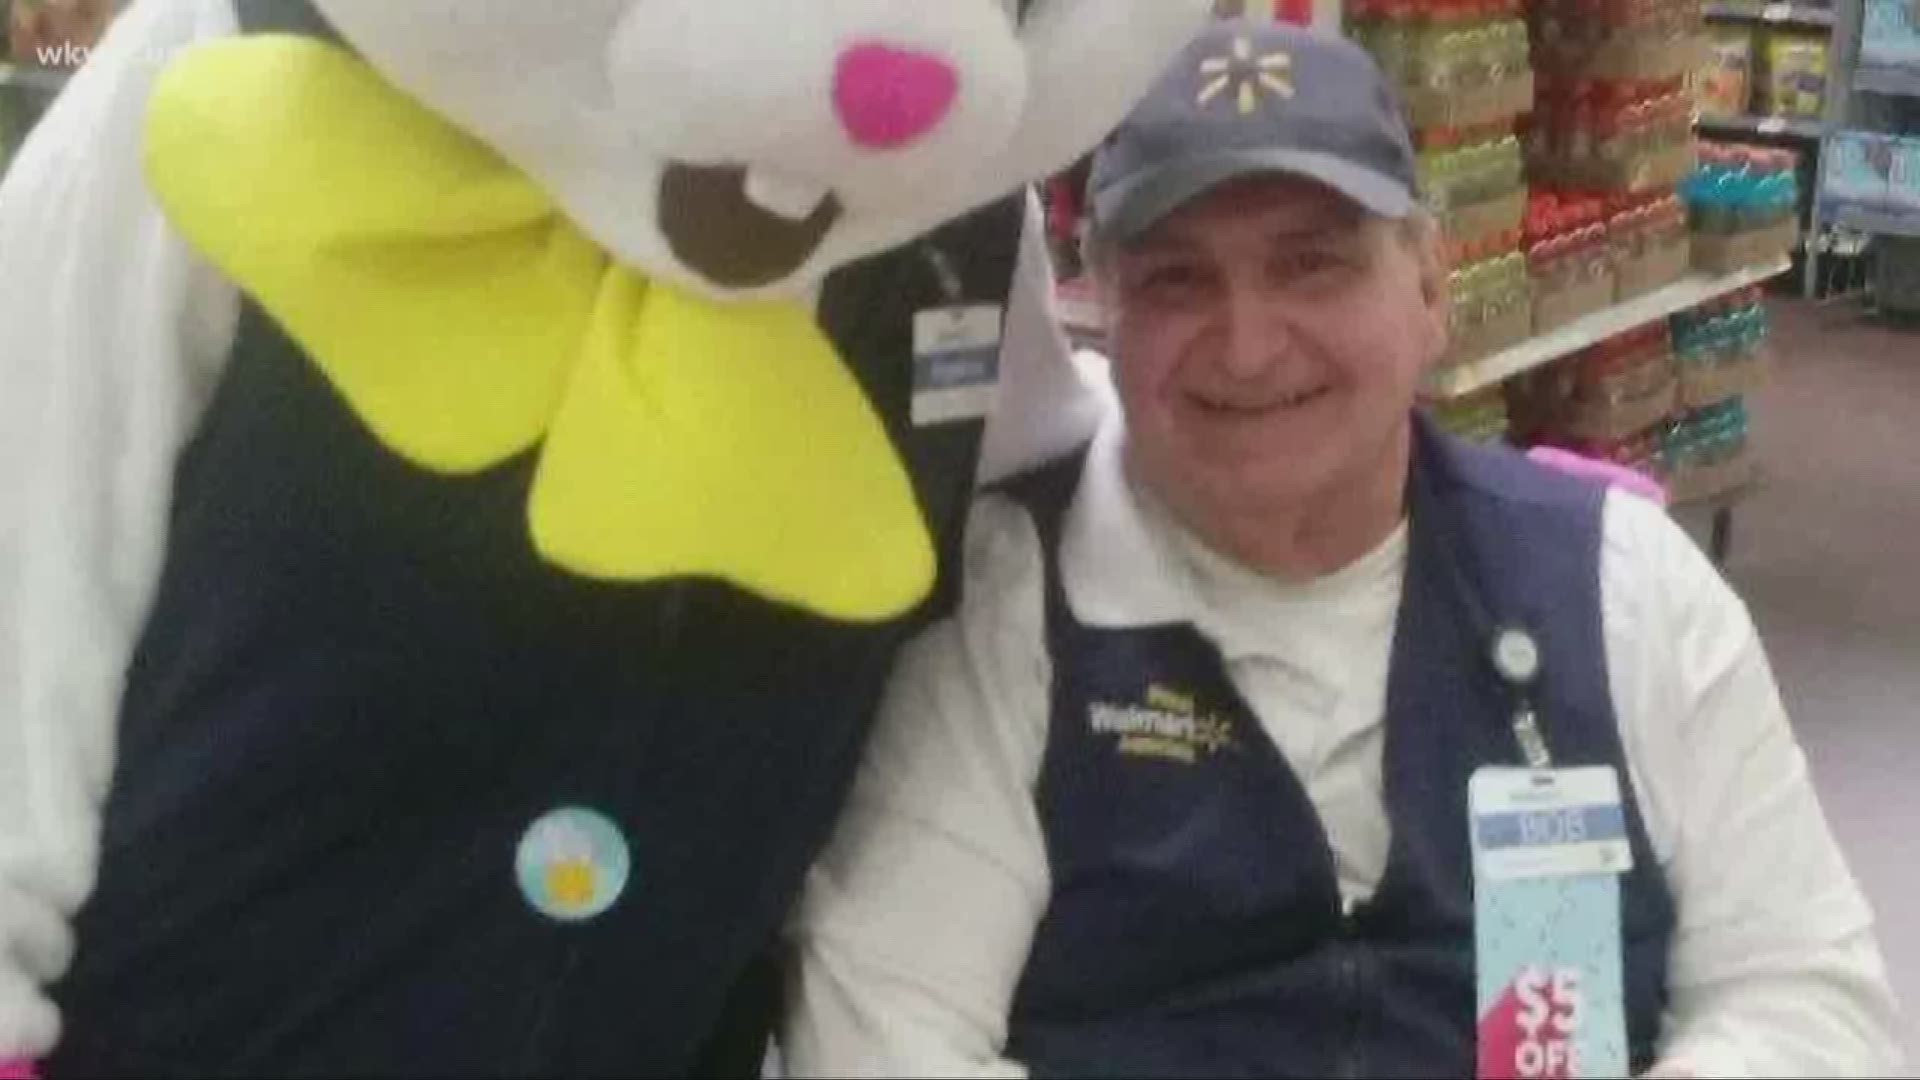 Walmart is getting rid of greeters, worrying workers with disabilities